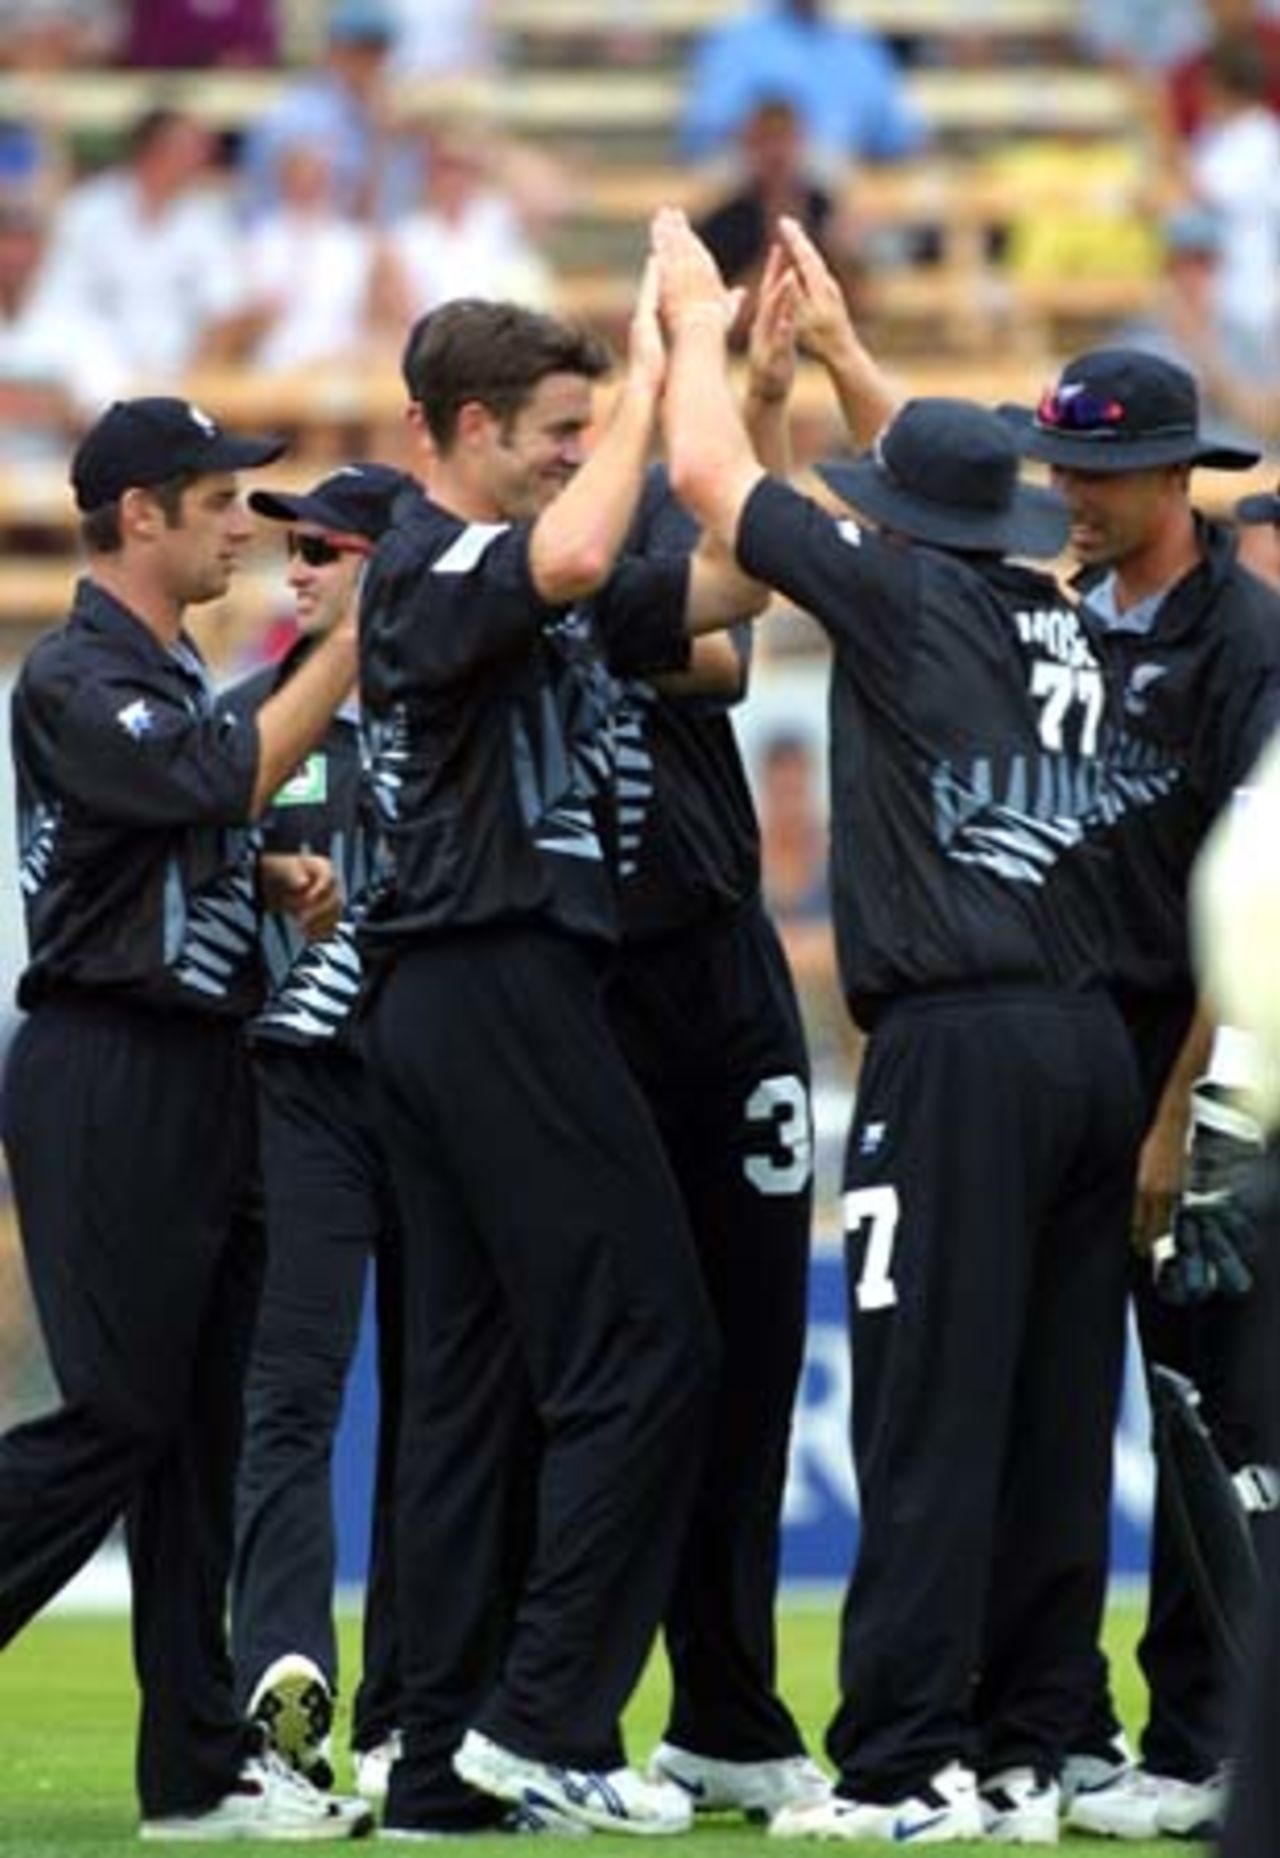 New Zealand left arm fast medium bowler James Franklin high-fives fielder Roger Twose in celebration of the dismissal of Sri Lankan batsman Aravinda de Silva, caught by Stephen Fleming (right) at slip for 5. Teammates Craig Spearman (left), Chris Harris, Jacob Oram (obscured), Adam Parore (obscured) also join in the celebrations. 5th One-Day International: New Zealand v Sri Lanka at Jade Stadium, Christchurch, 11 February 2001.